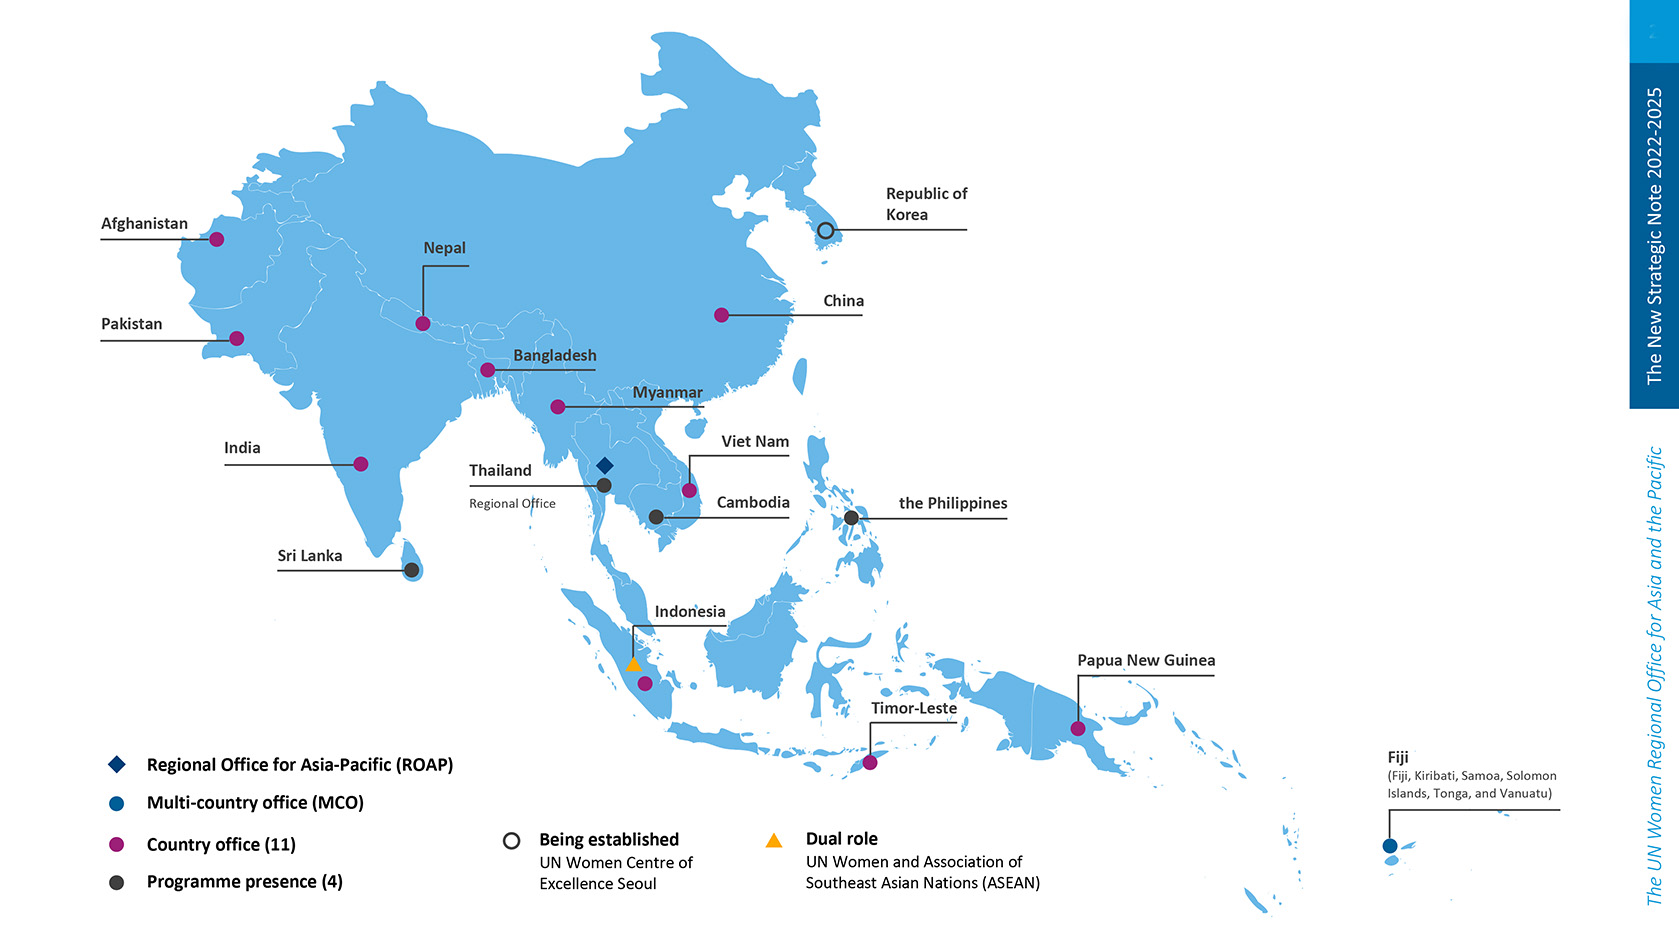 UN Women offices in Asia-Pacific